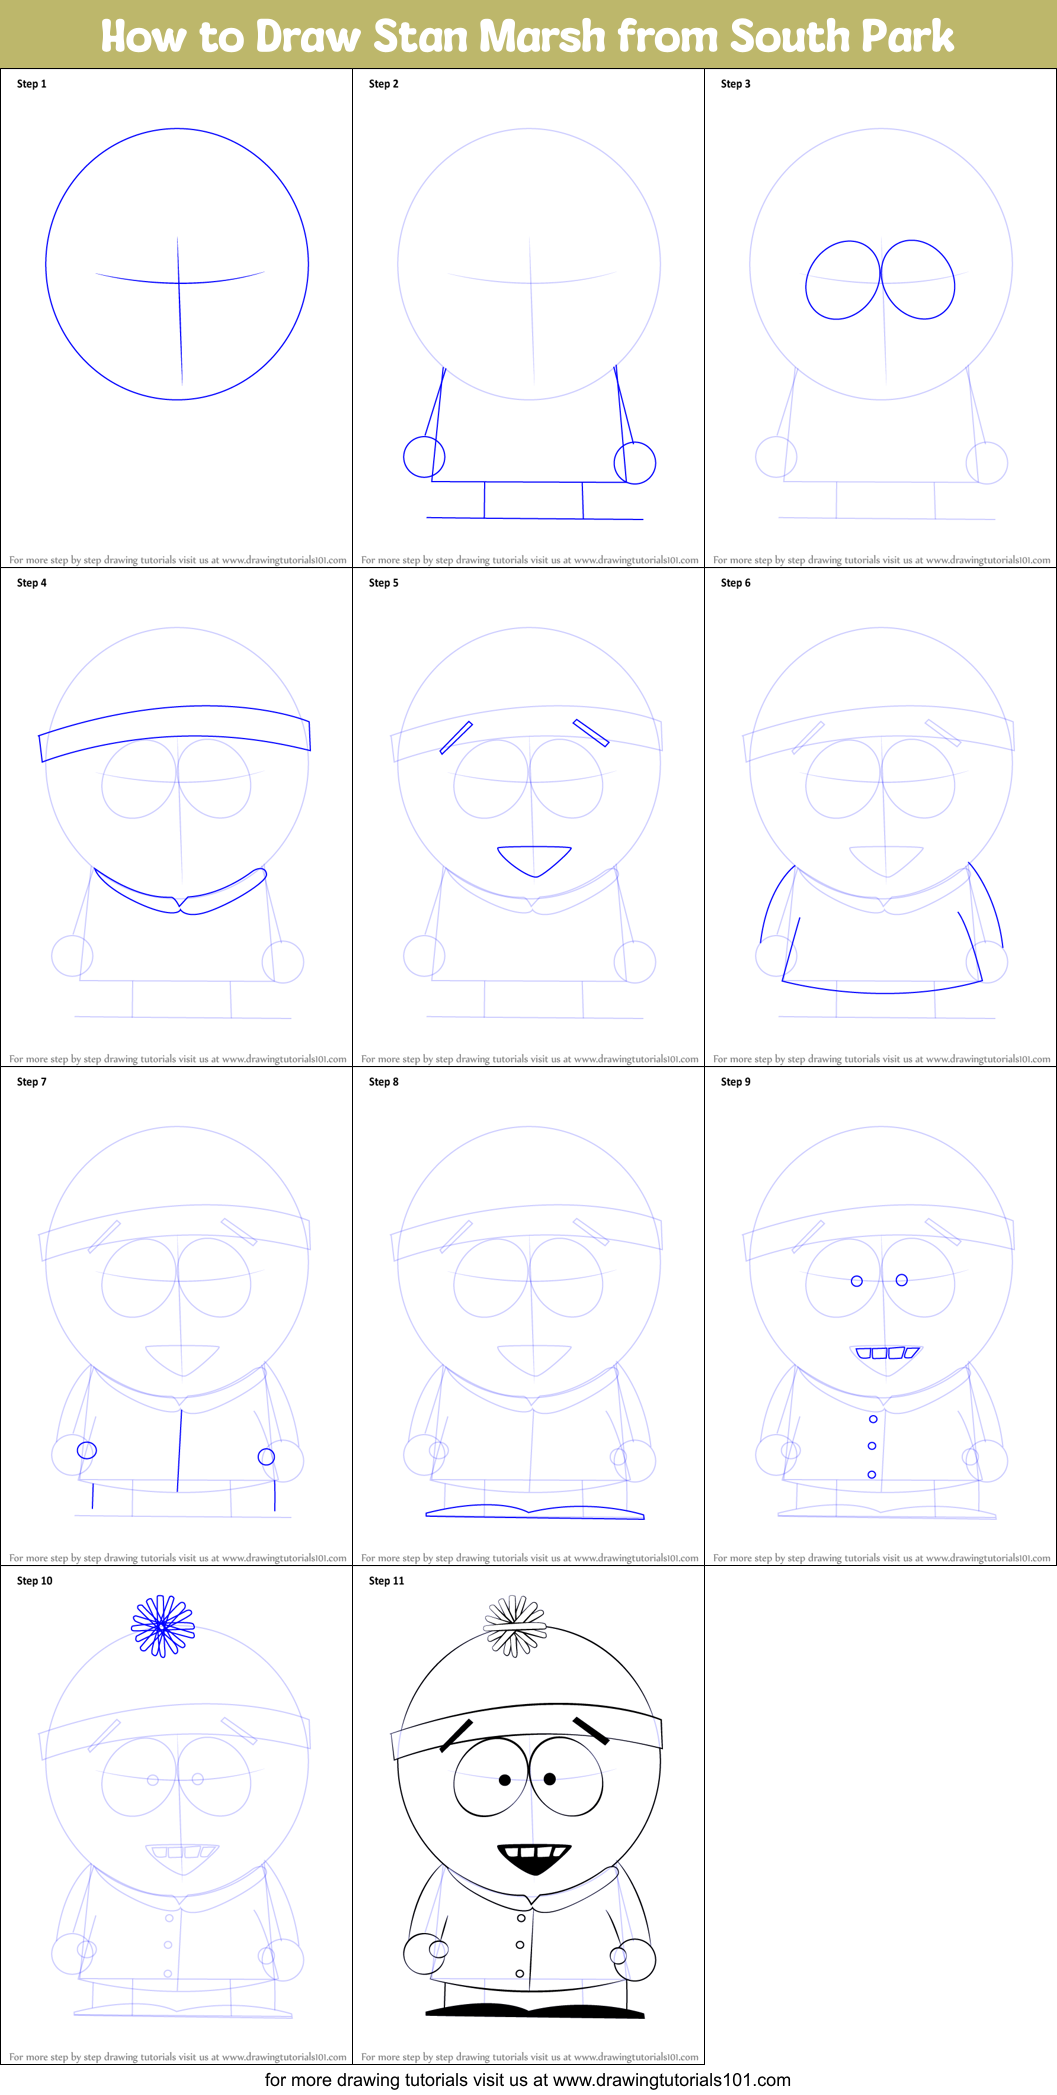 How to Draw Stan Marsh from South Park printable step by step drawing